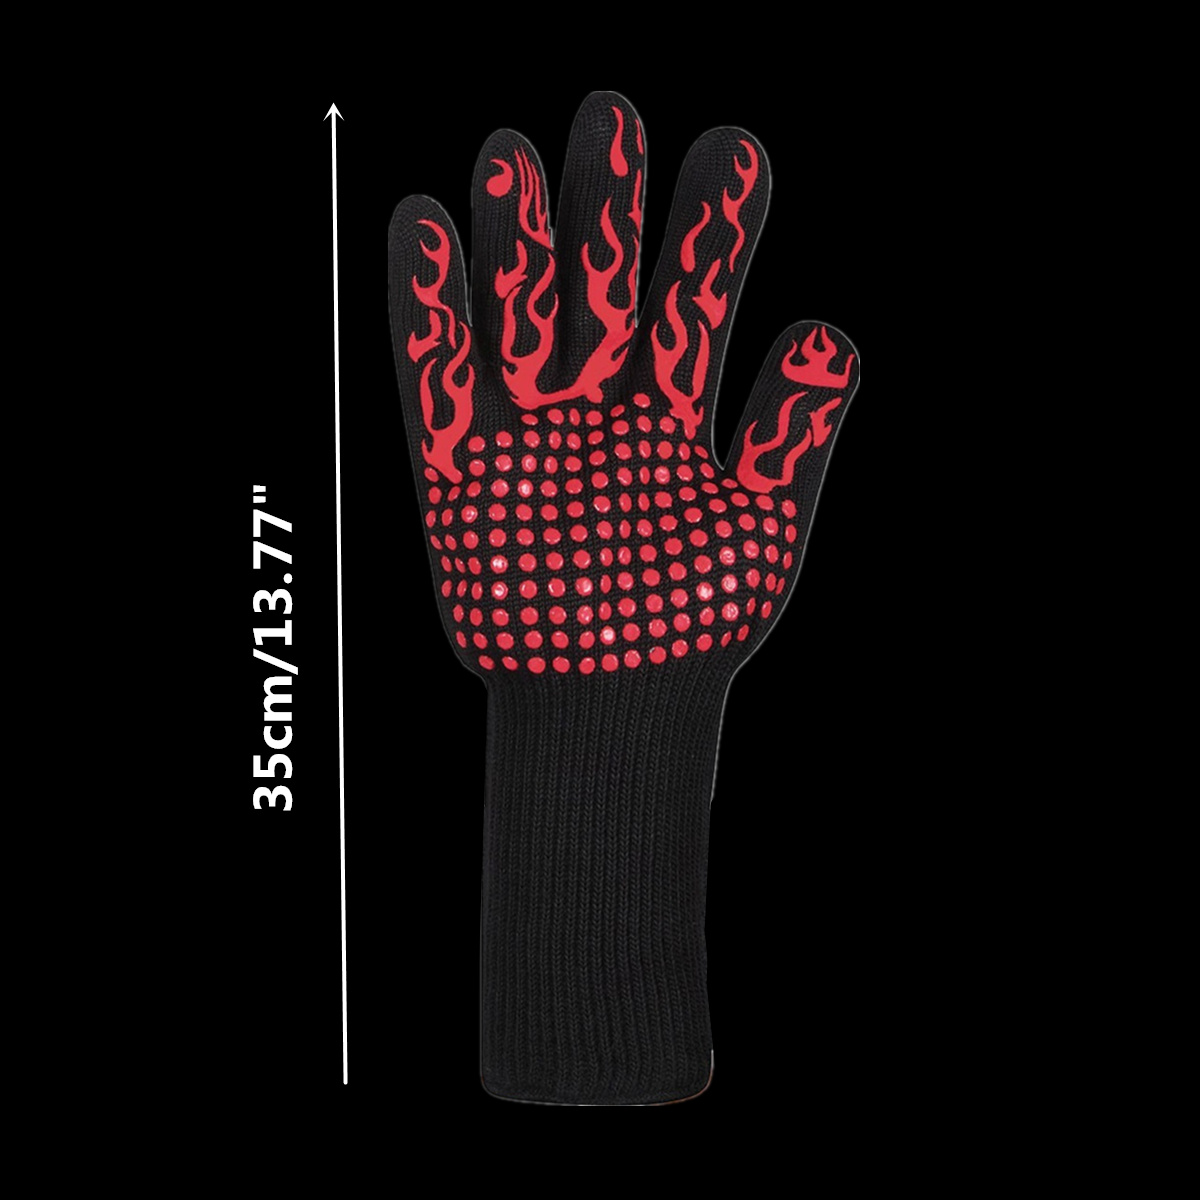 Silicone-Extreme-Heat-insulated-Cooking-Glove-Oven-Hot-BBQ-Grilling-Heating-Proof-Mitt-1375772